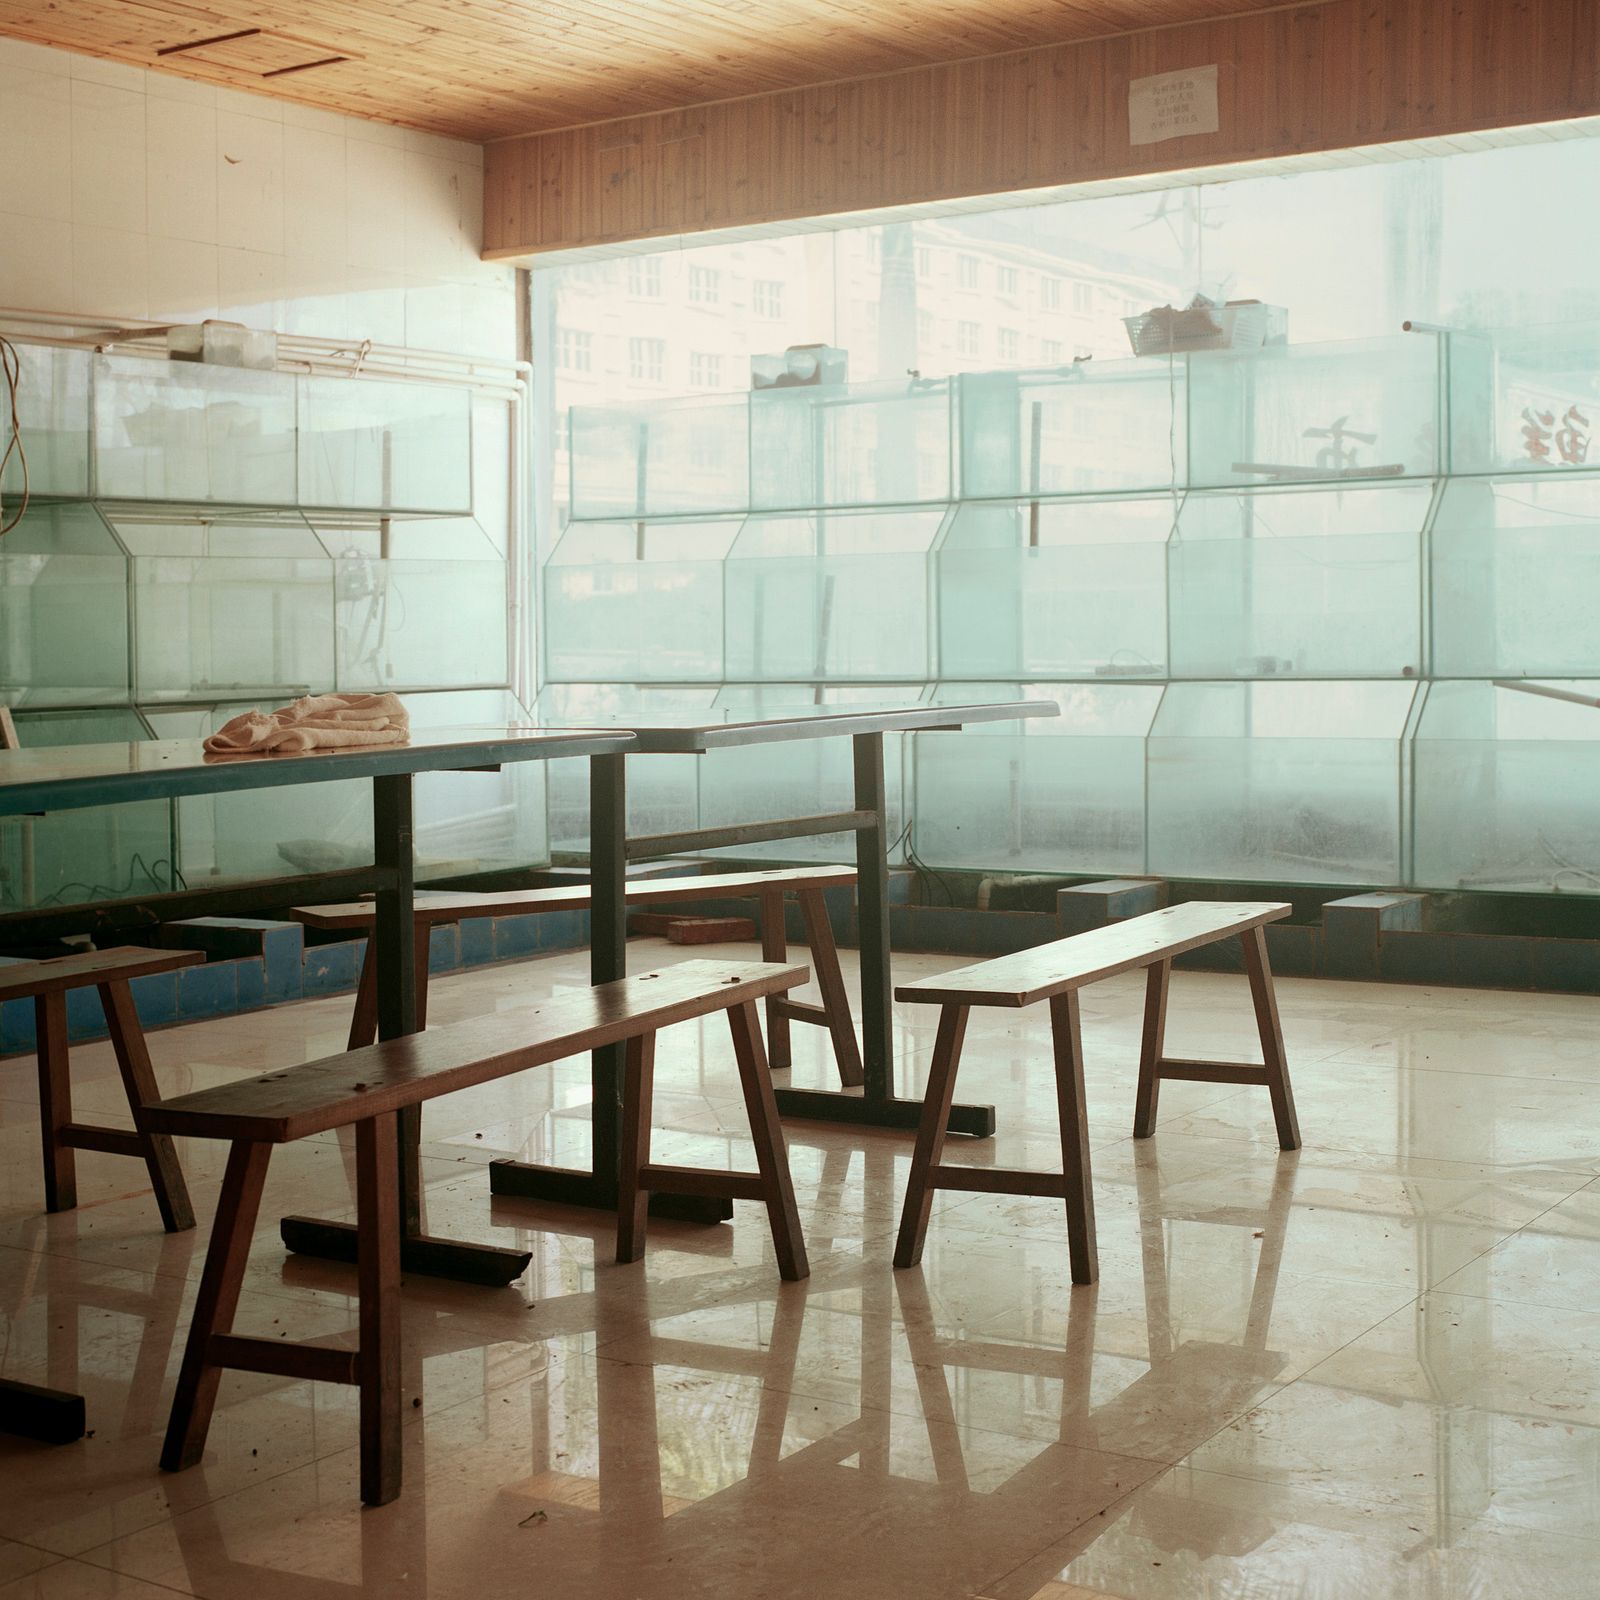 © Huiying Ore - Empty seafood tanks and furniture in a restauant at Boten city gather dust after a long period of disuse.